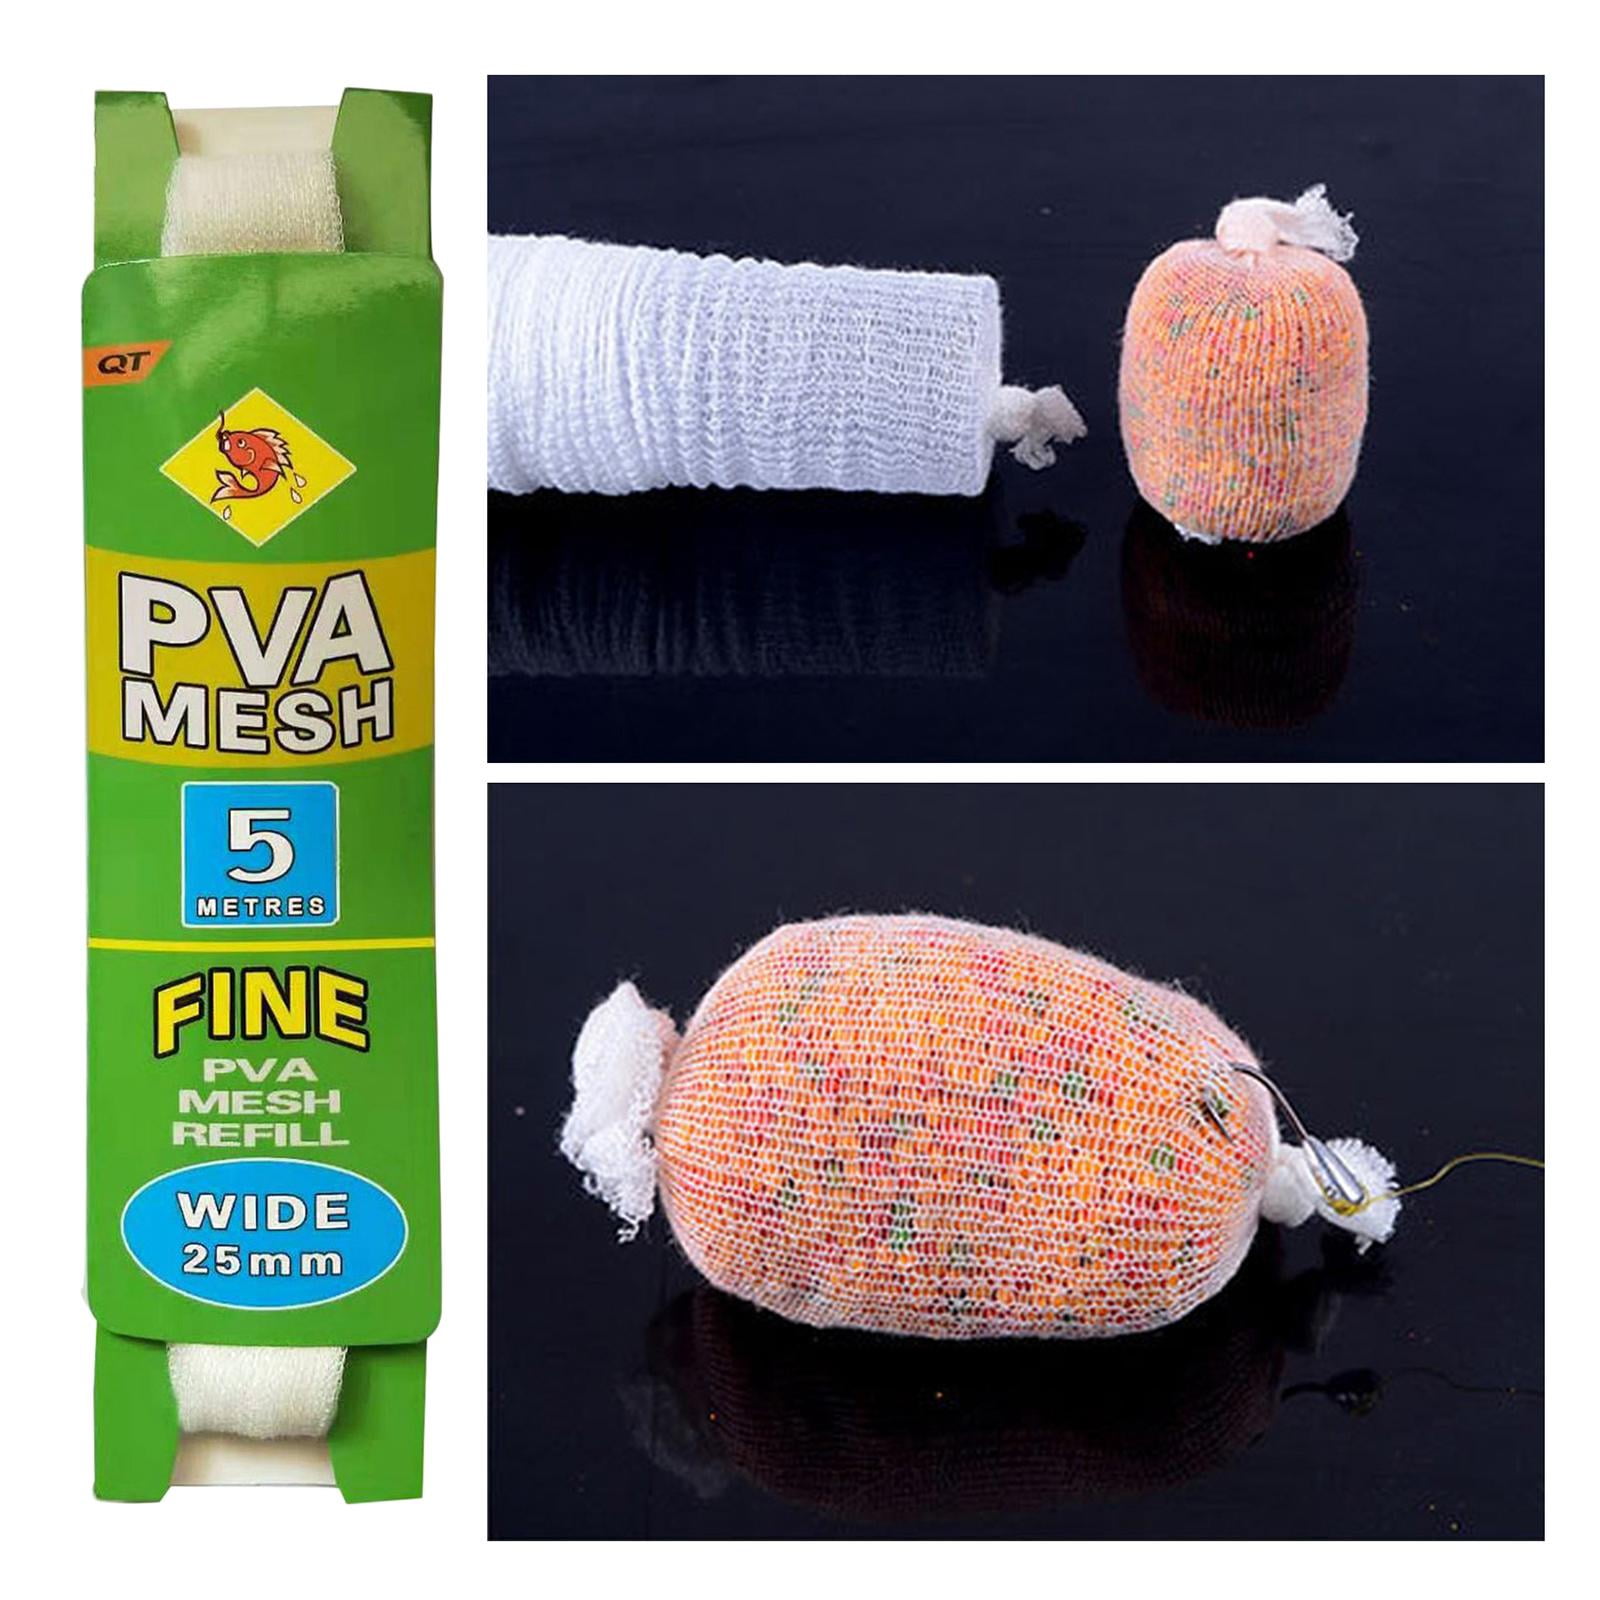 Details about   5meters Carp Feeder Fishing PVA Mesh Water Soluble Net Fishing Tackle Bait Wrap 